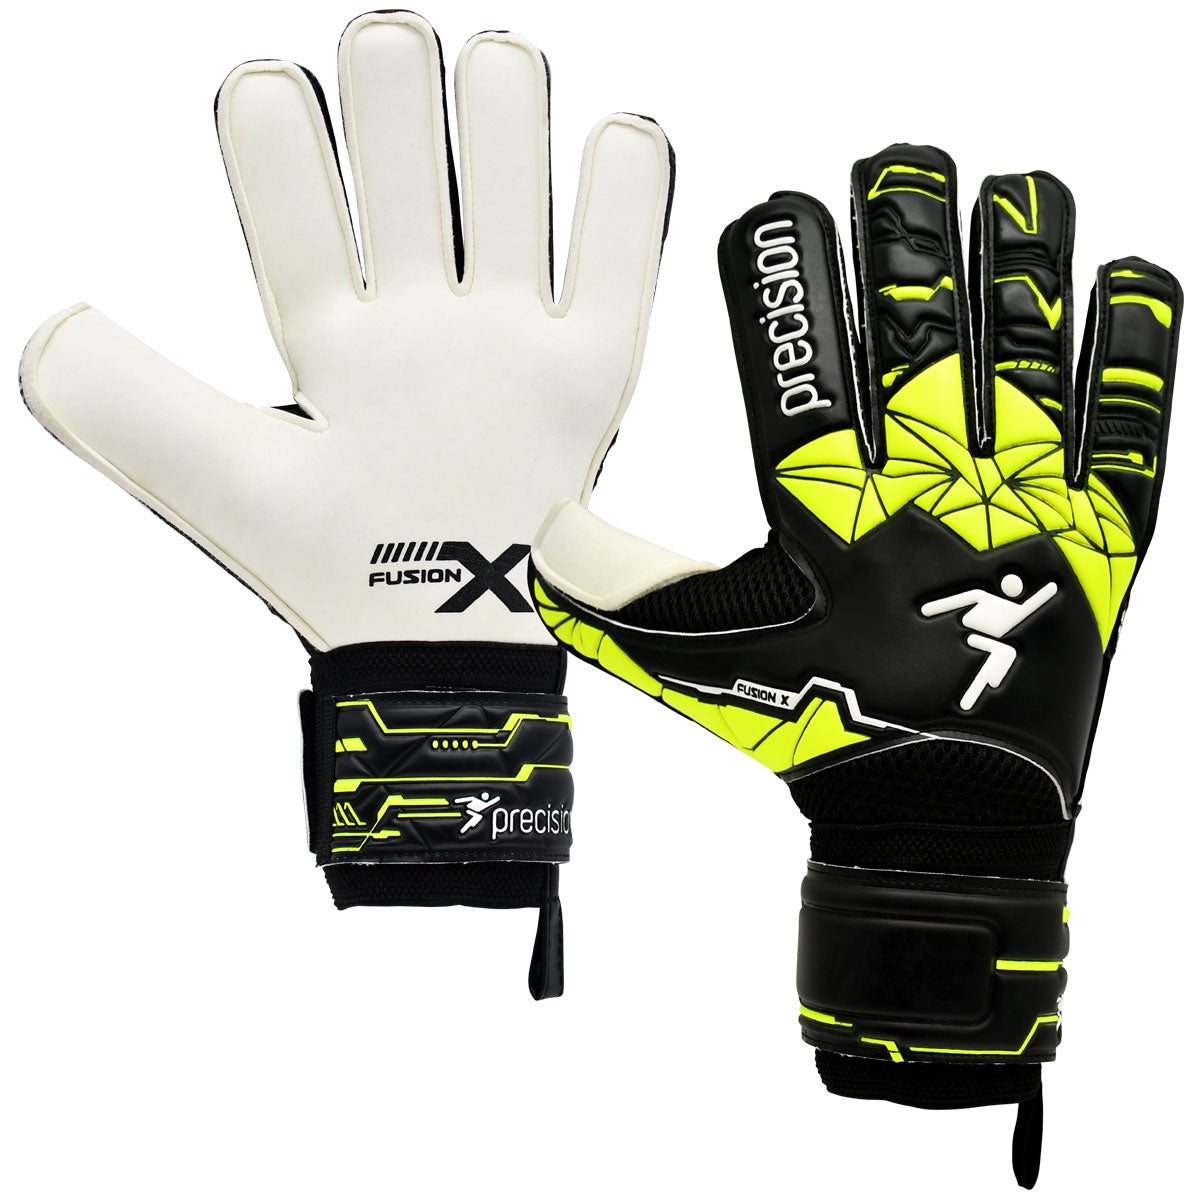 Precision Training Fusion X Flat Cut Finger Protect Goalkeeper Gloves - Adult - Black/Yellow/White